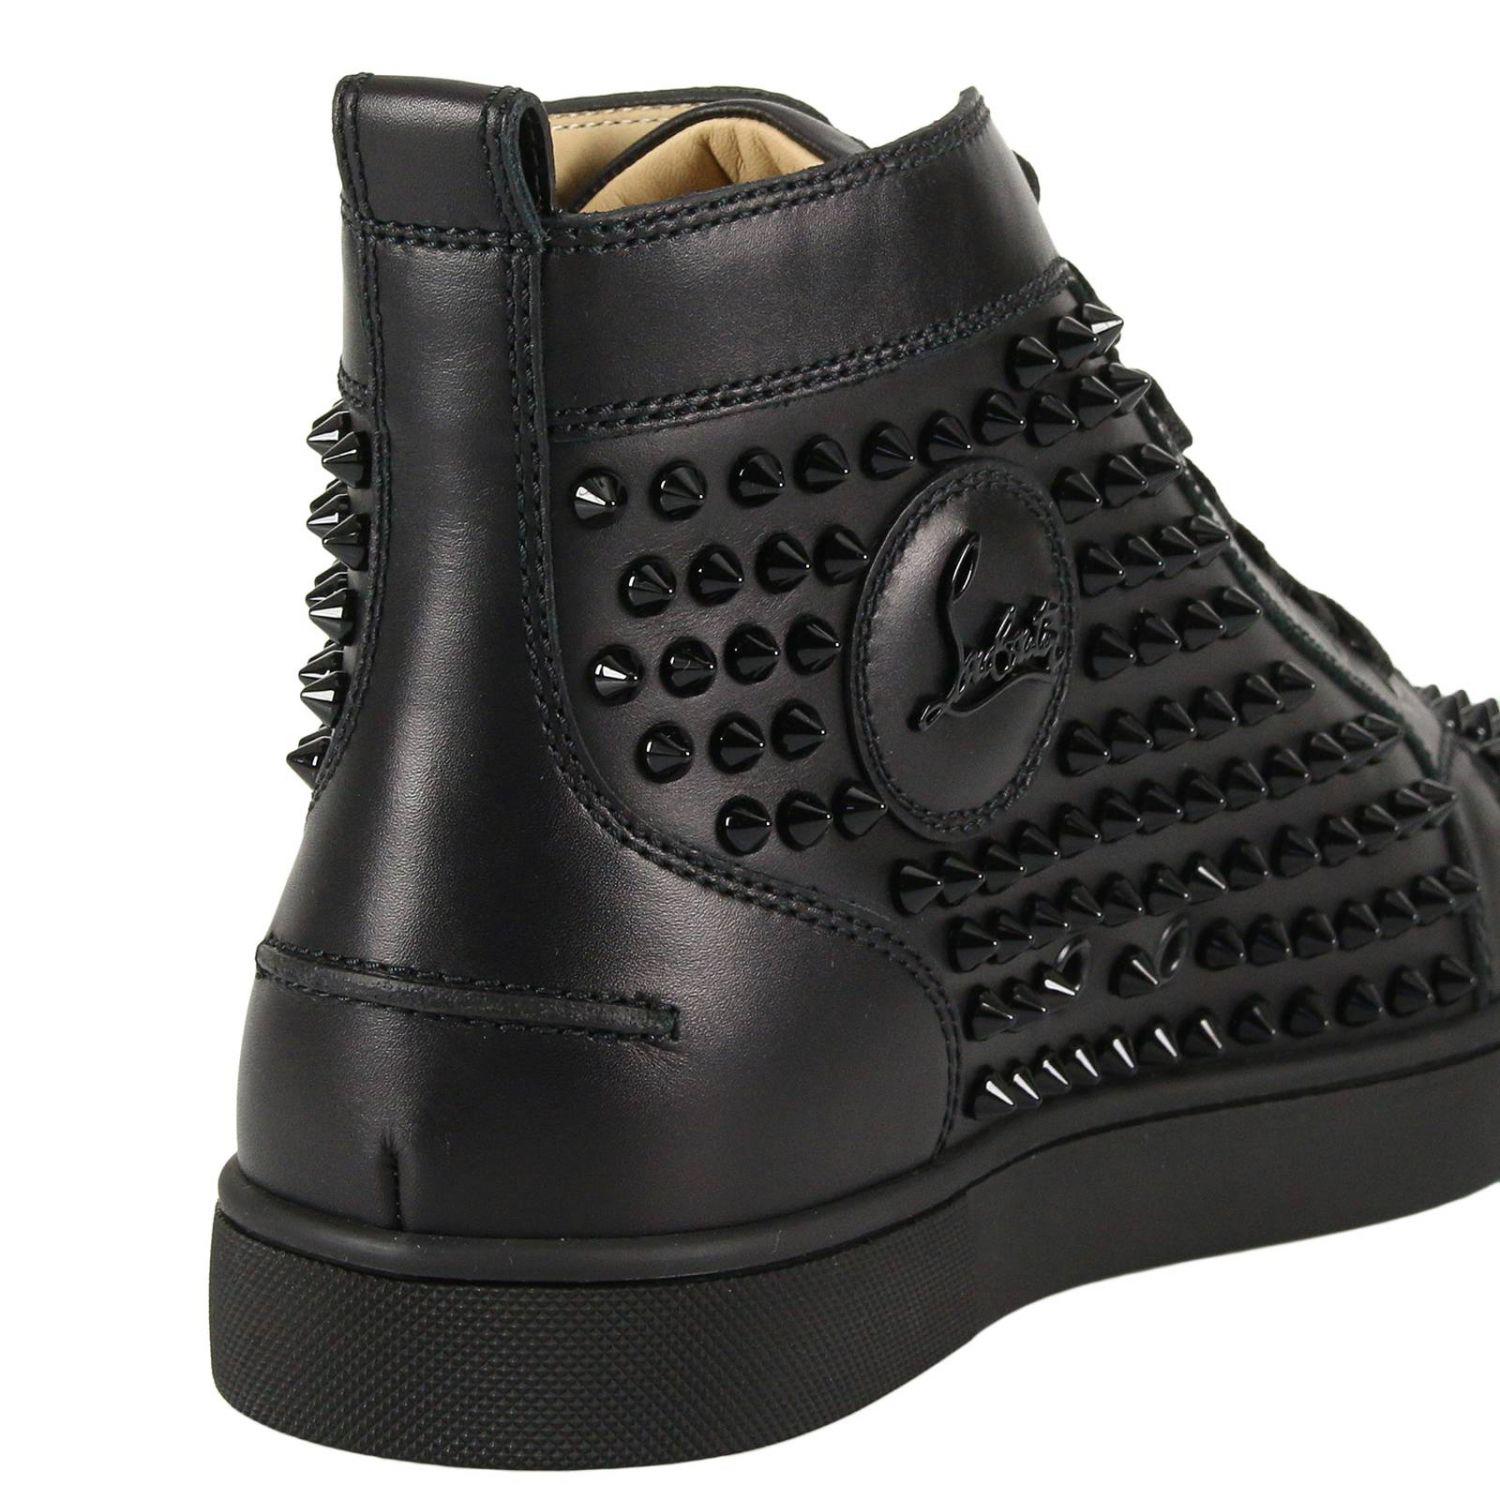 Christian Louboutin Leather Studded Louis High-top Sneakers in Black for Men - Lyst